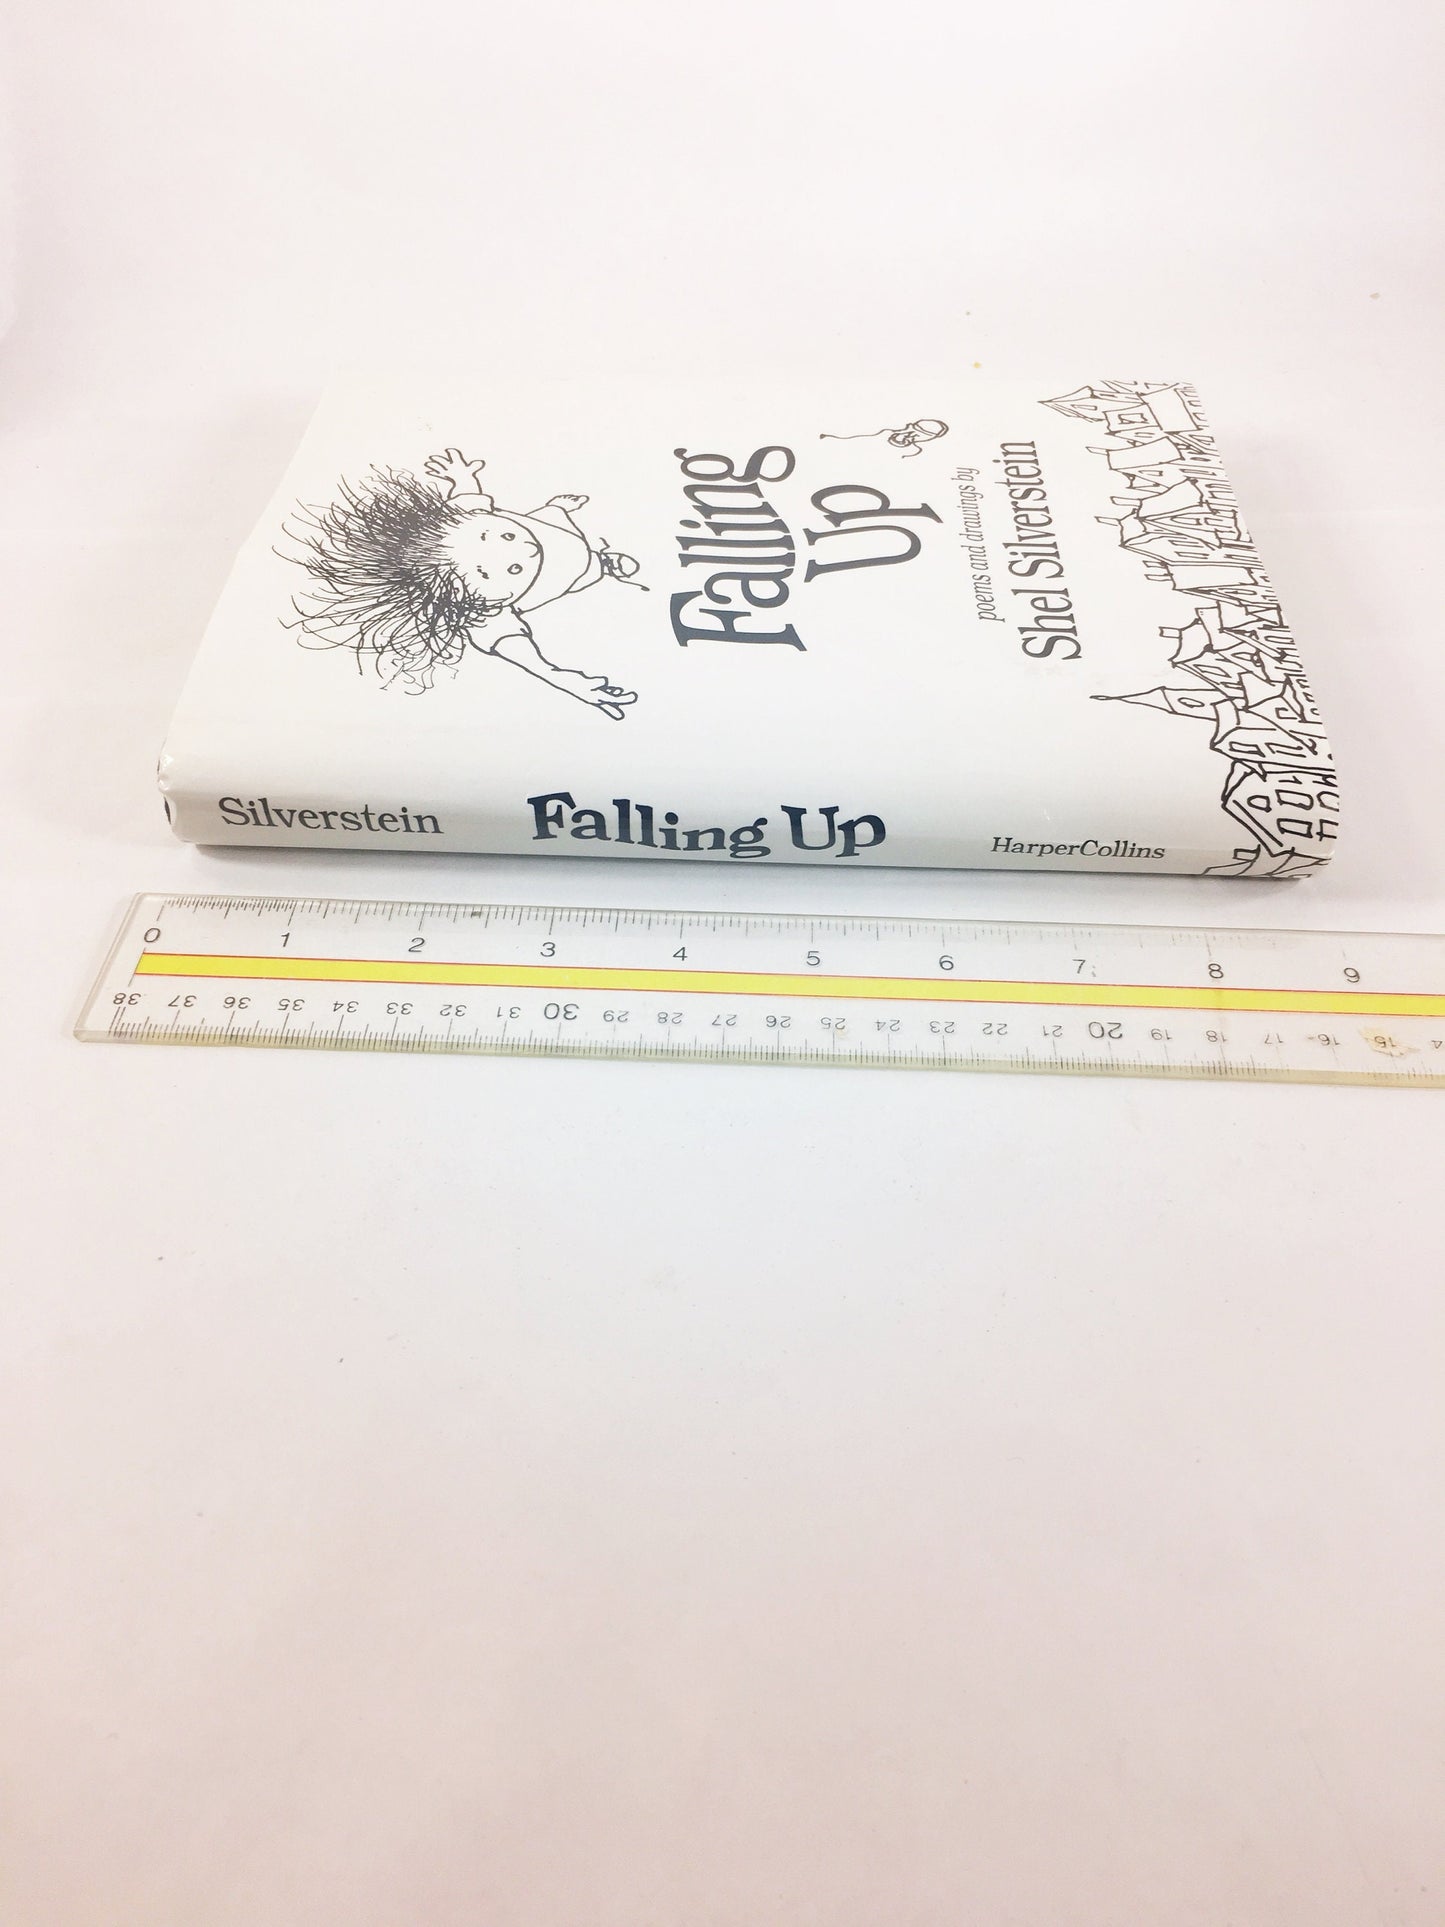 Falling Up by Shel Silverstein. FIRST EDITION vintage book circa 1996. Beautiful collection of poems for children. Gift. Collector